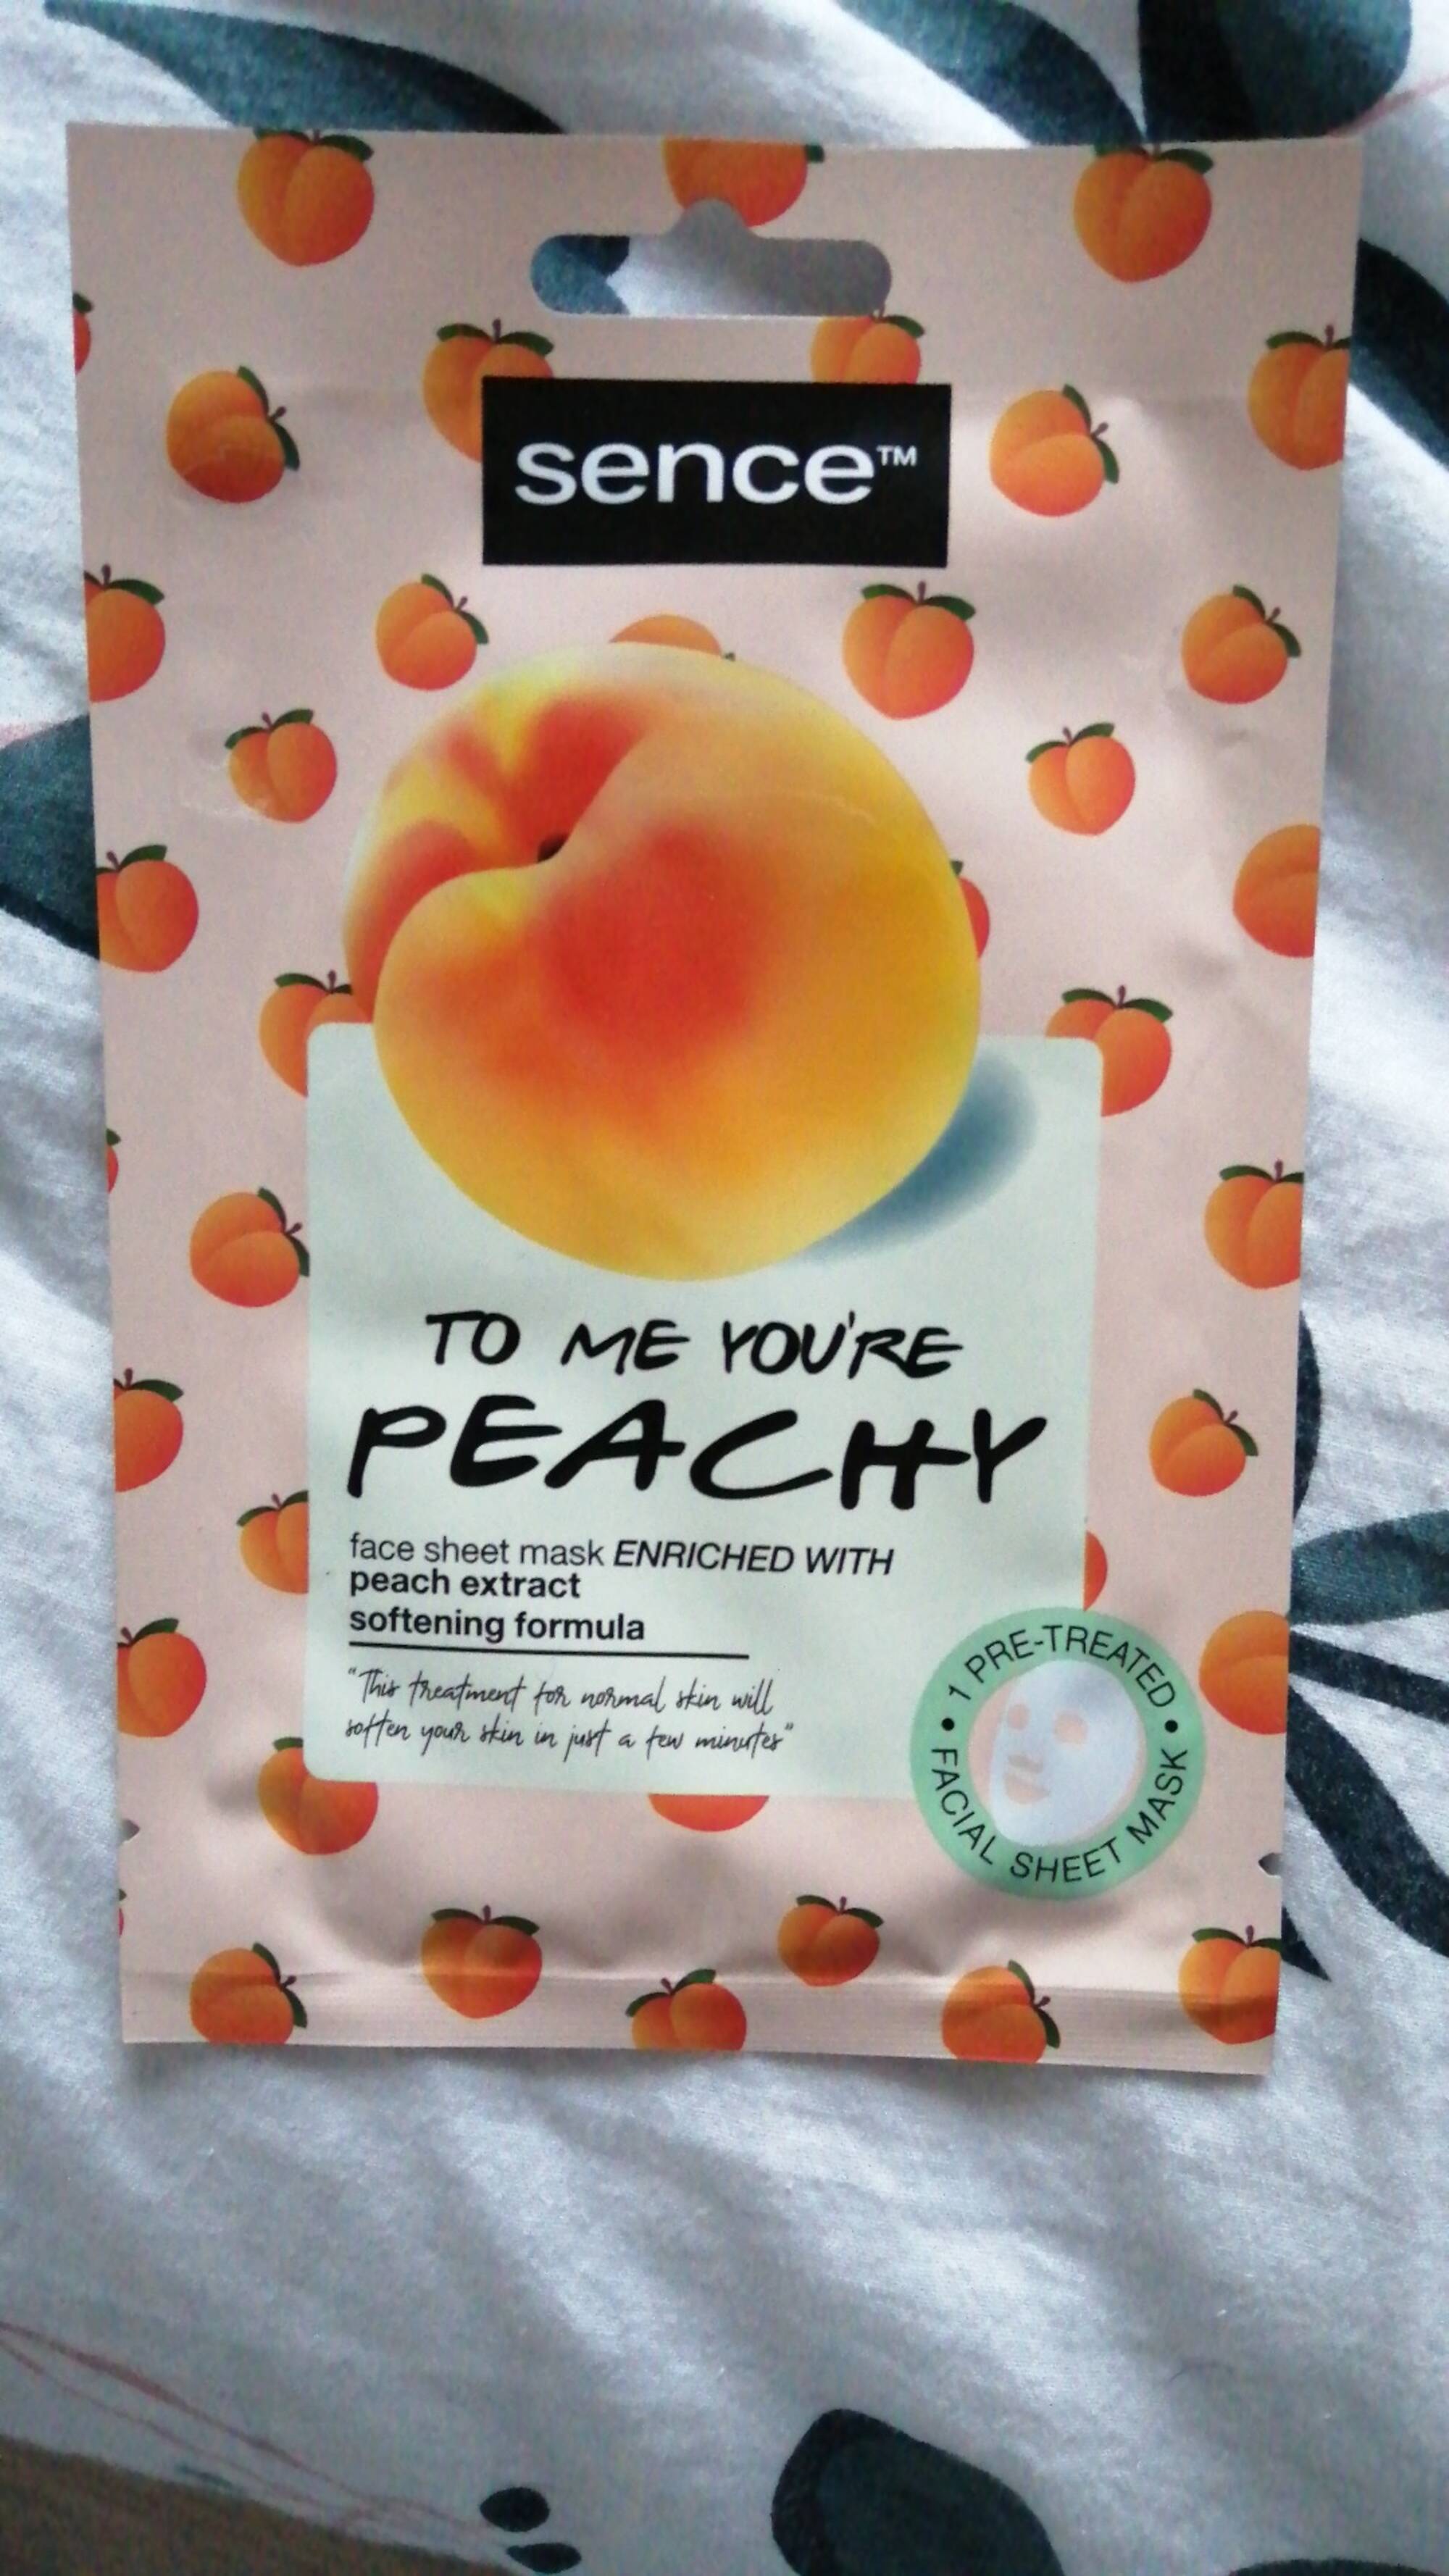 SENCE - To me you're peachy - Face sheet mask